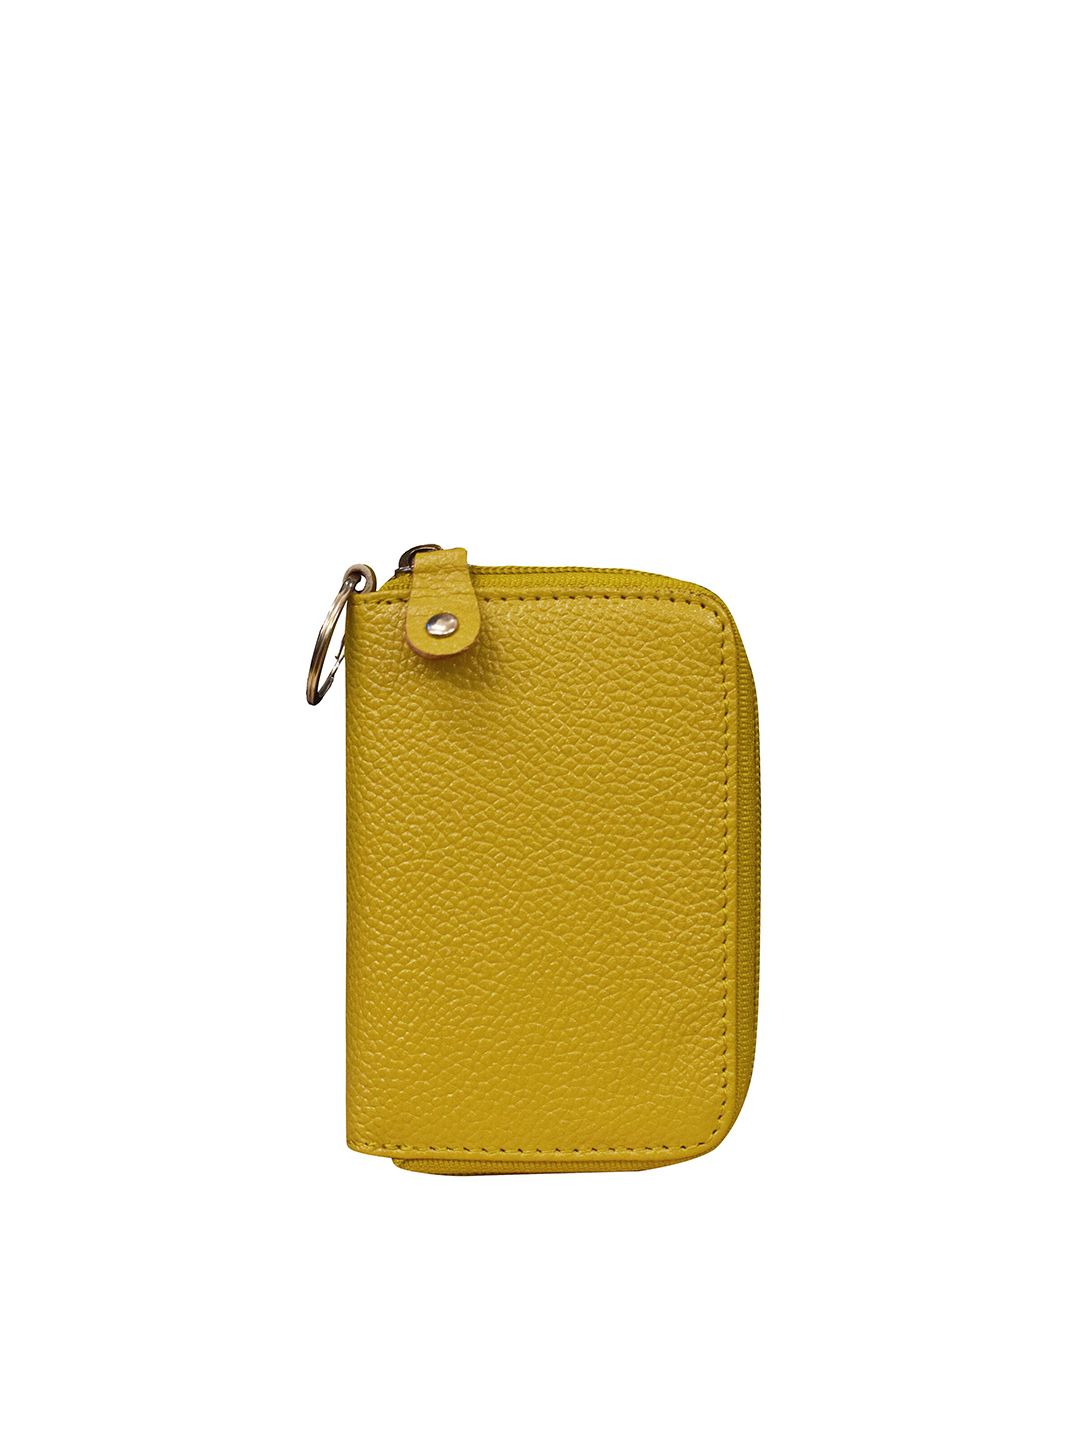 ABYS Yellow Leather Card Holder Price in India